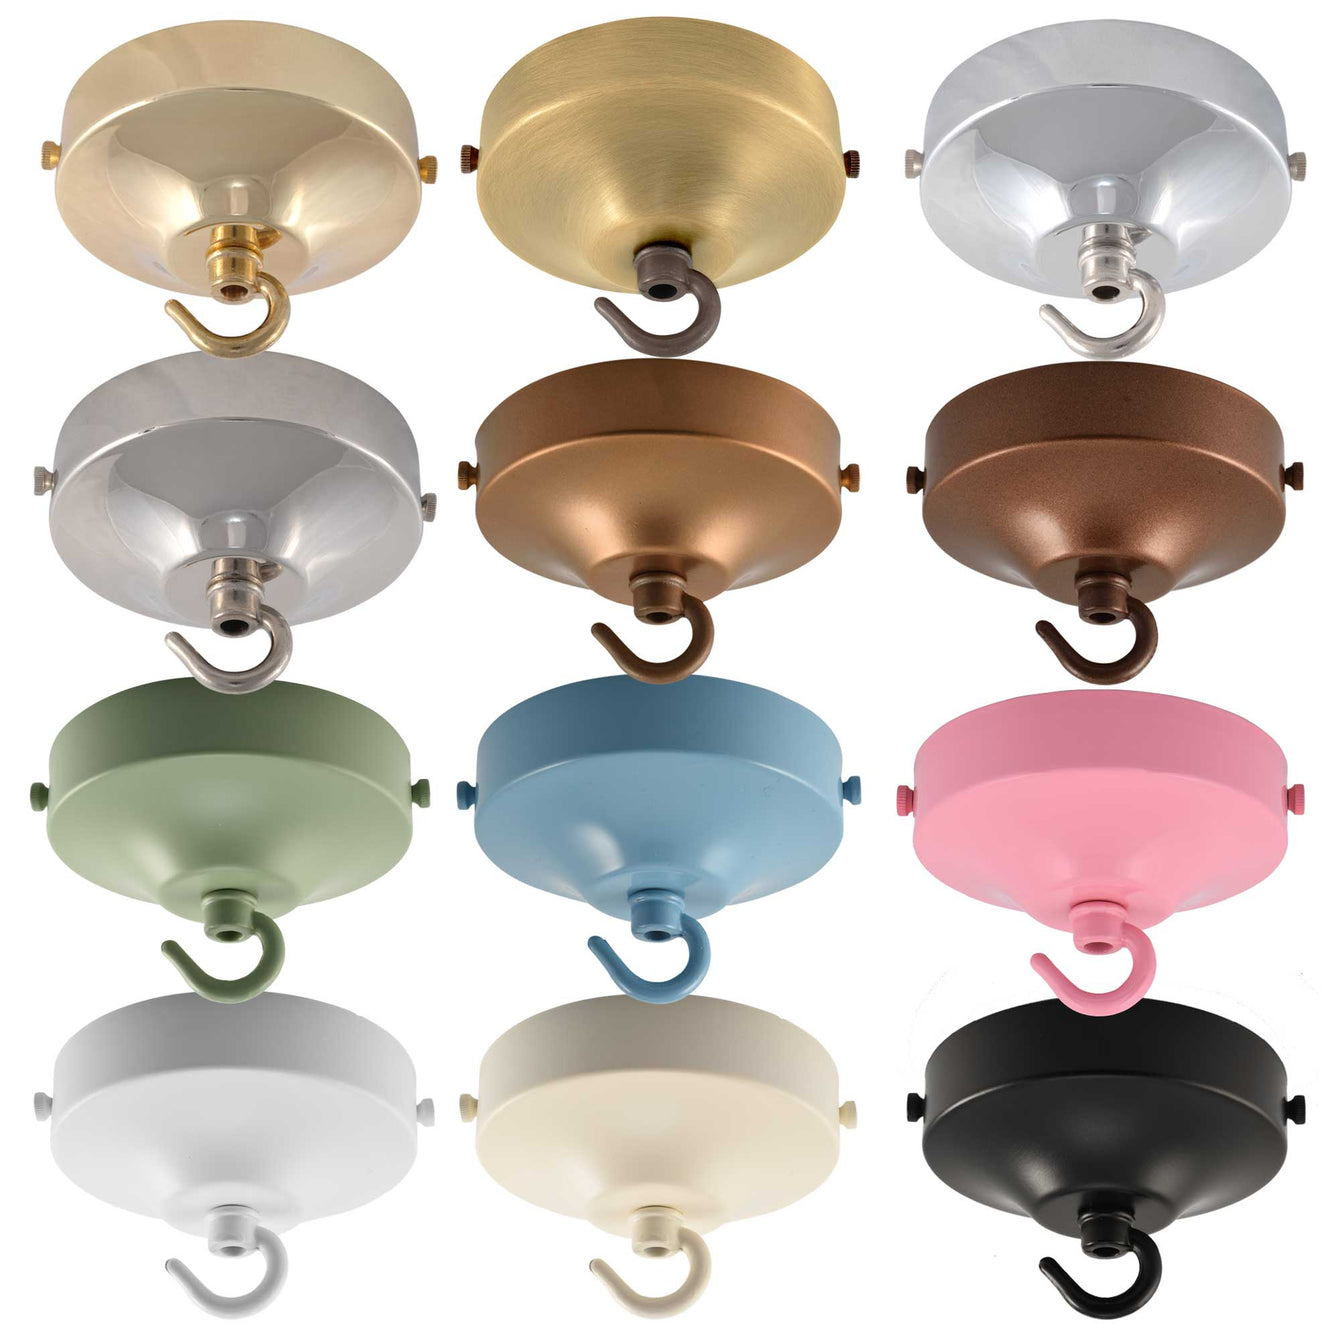 ElekTek 100mm Diameter Convex Ceiling Rose with Strap Bracket and Hook Metallic and Powder Coated Finishes Brass